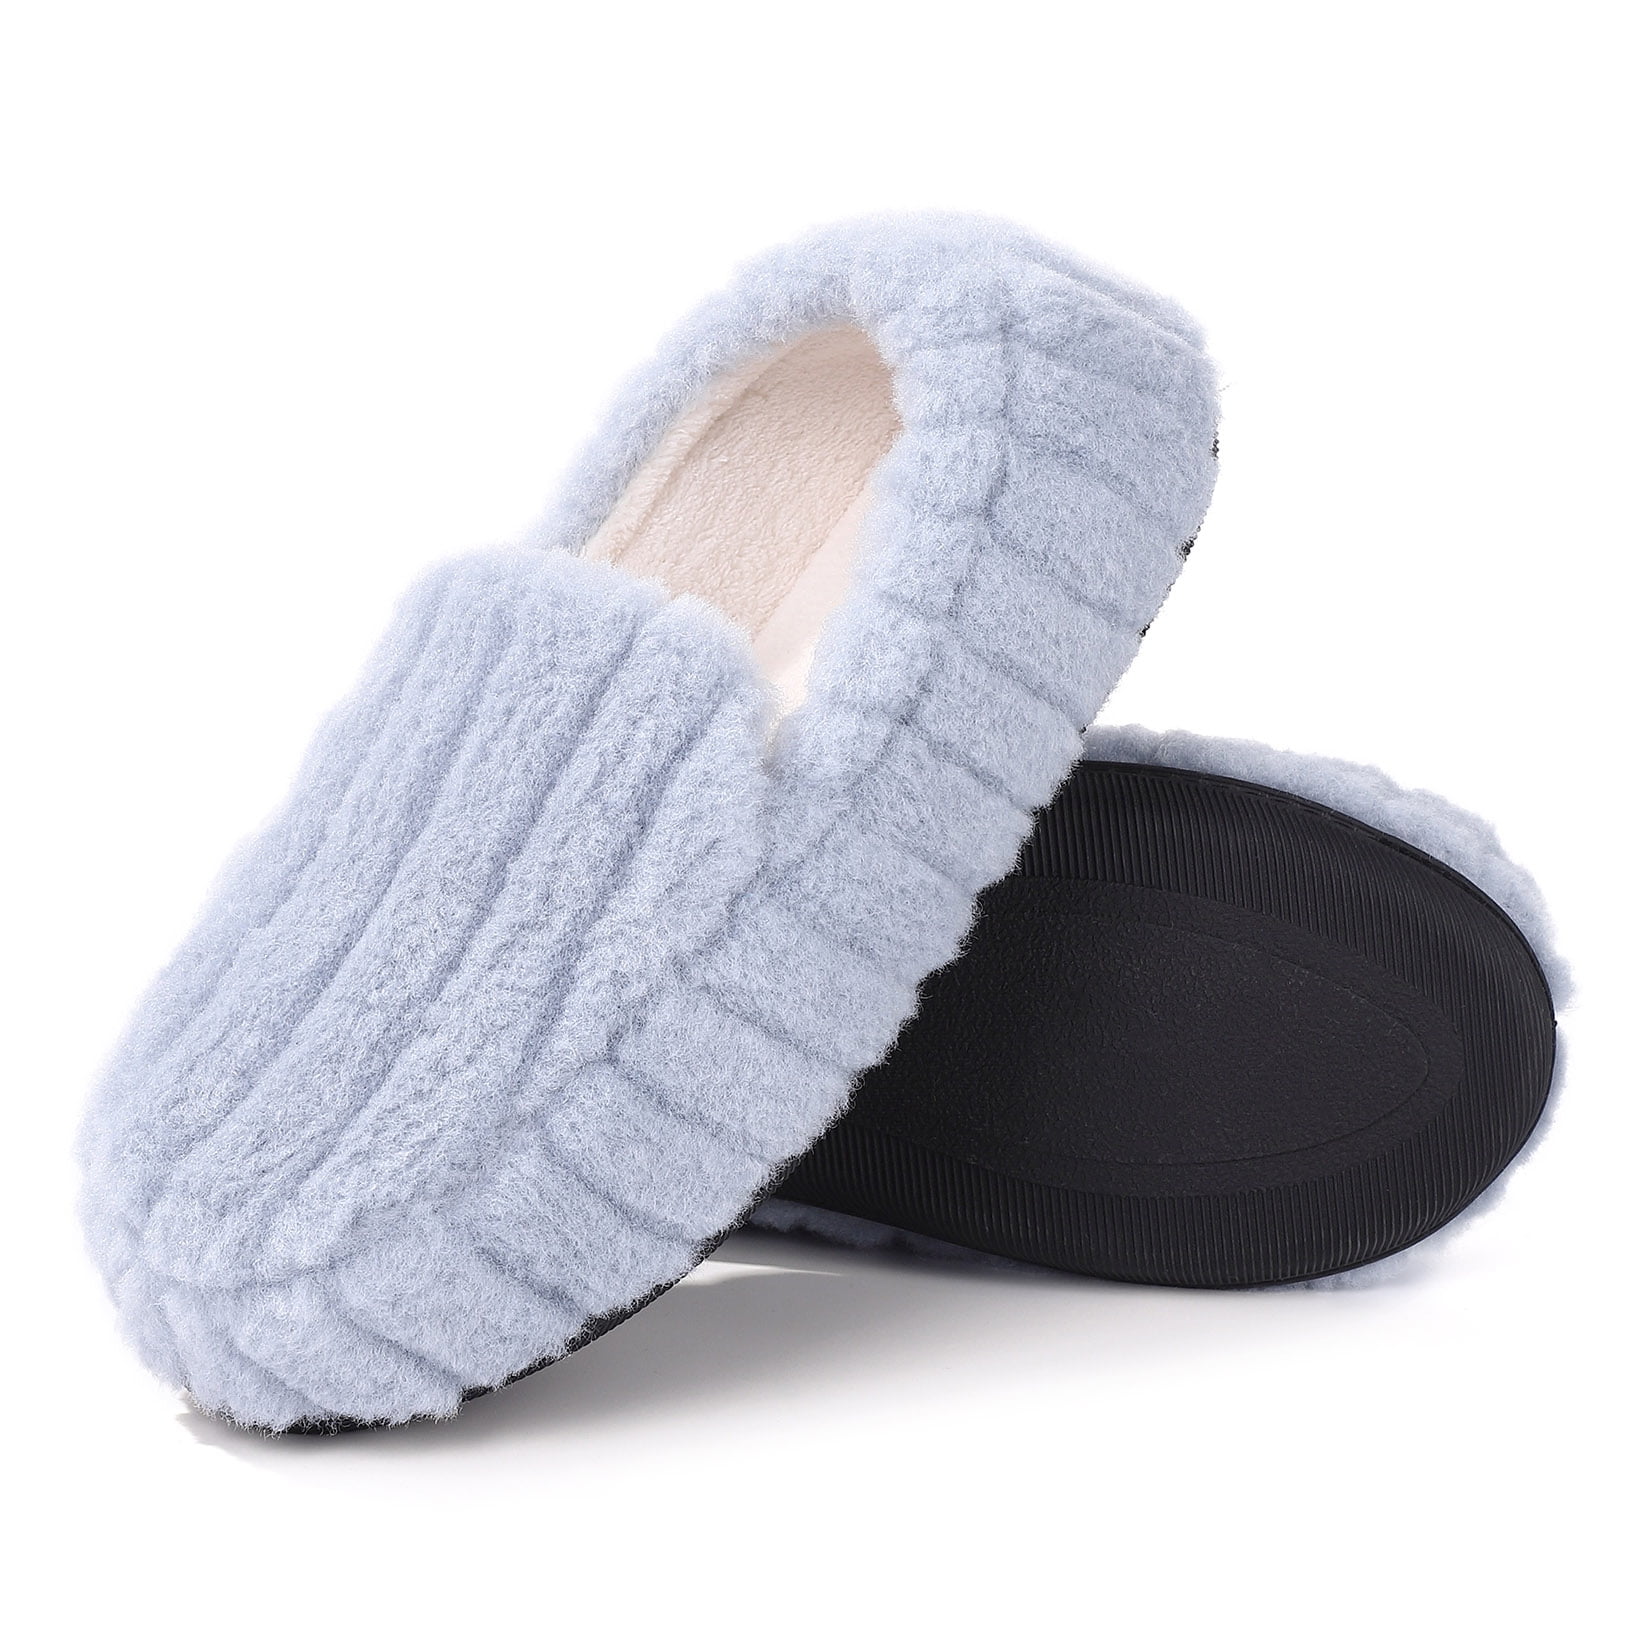 HA EMORE Women s Indoor Outdoor Loafers Striped Memory Foam Slippers House Shoes House Slippers for Women Fuzzy Slippers 6c98856a c3df 4820 a5a6 51ffccc4ea6b.74139e2dfb457da21fda2bc9ae0f018c